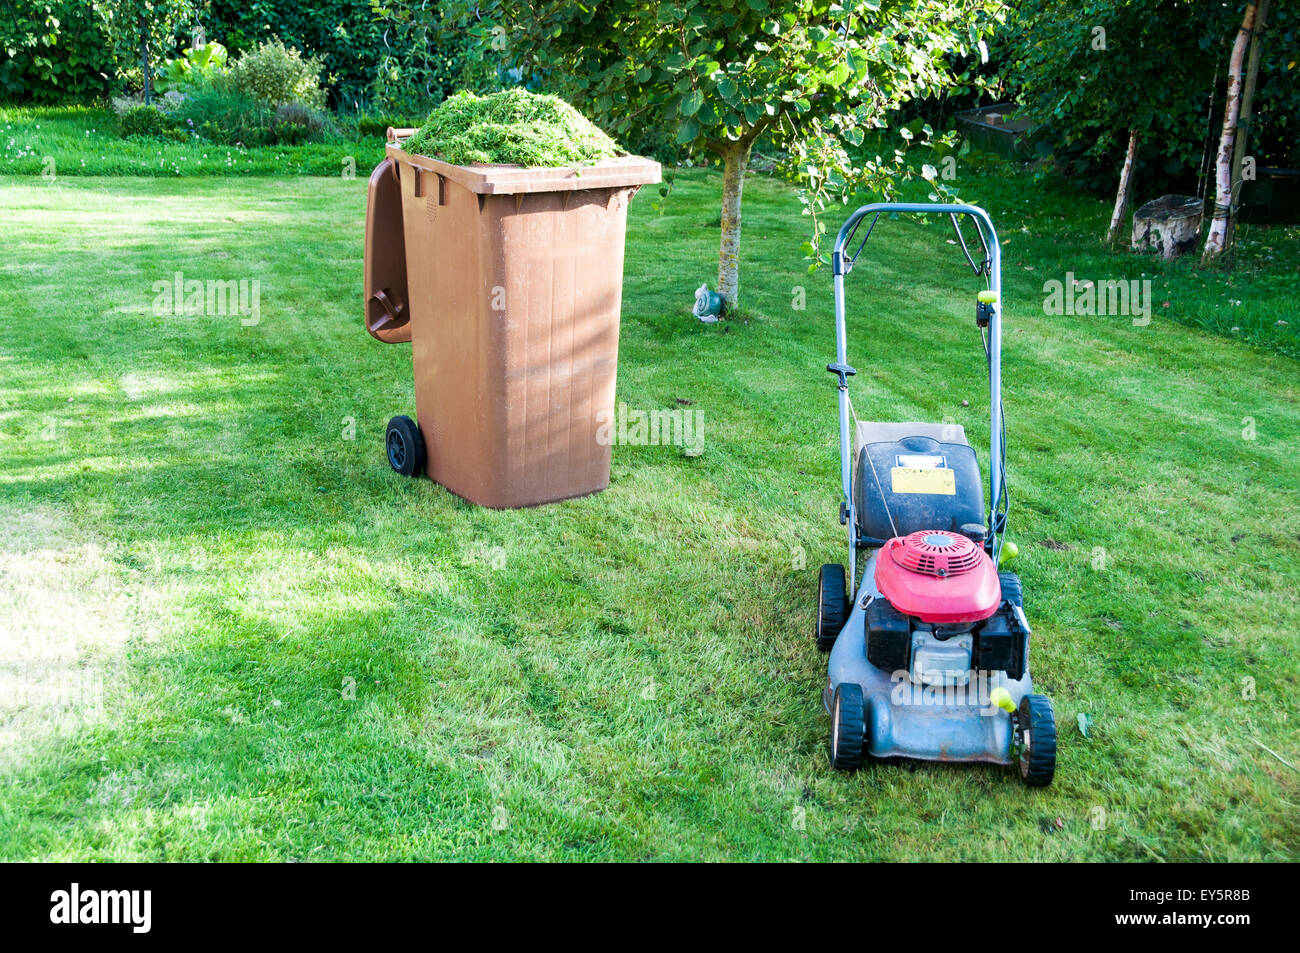 Mowing the turf in a garden Stock Photo